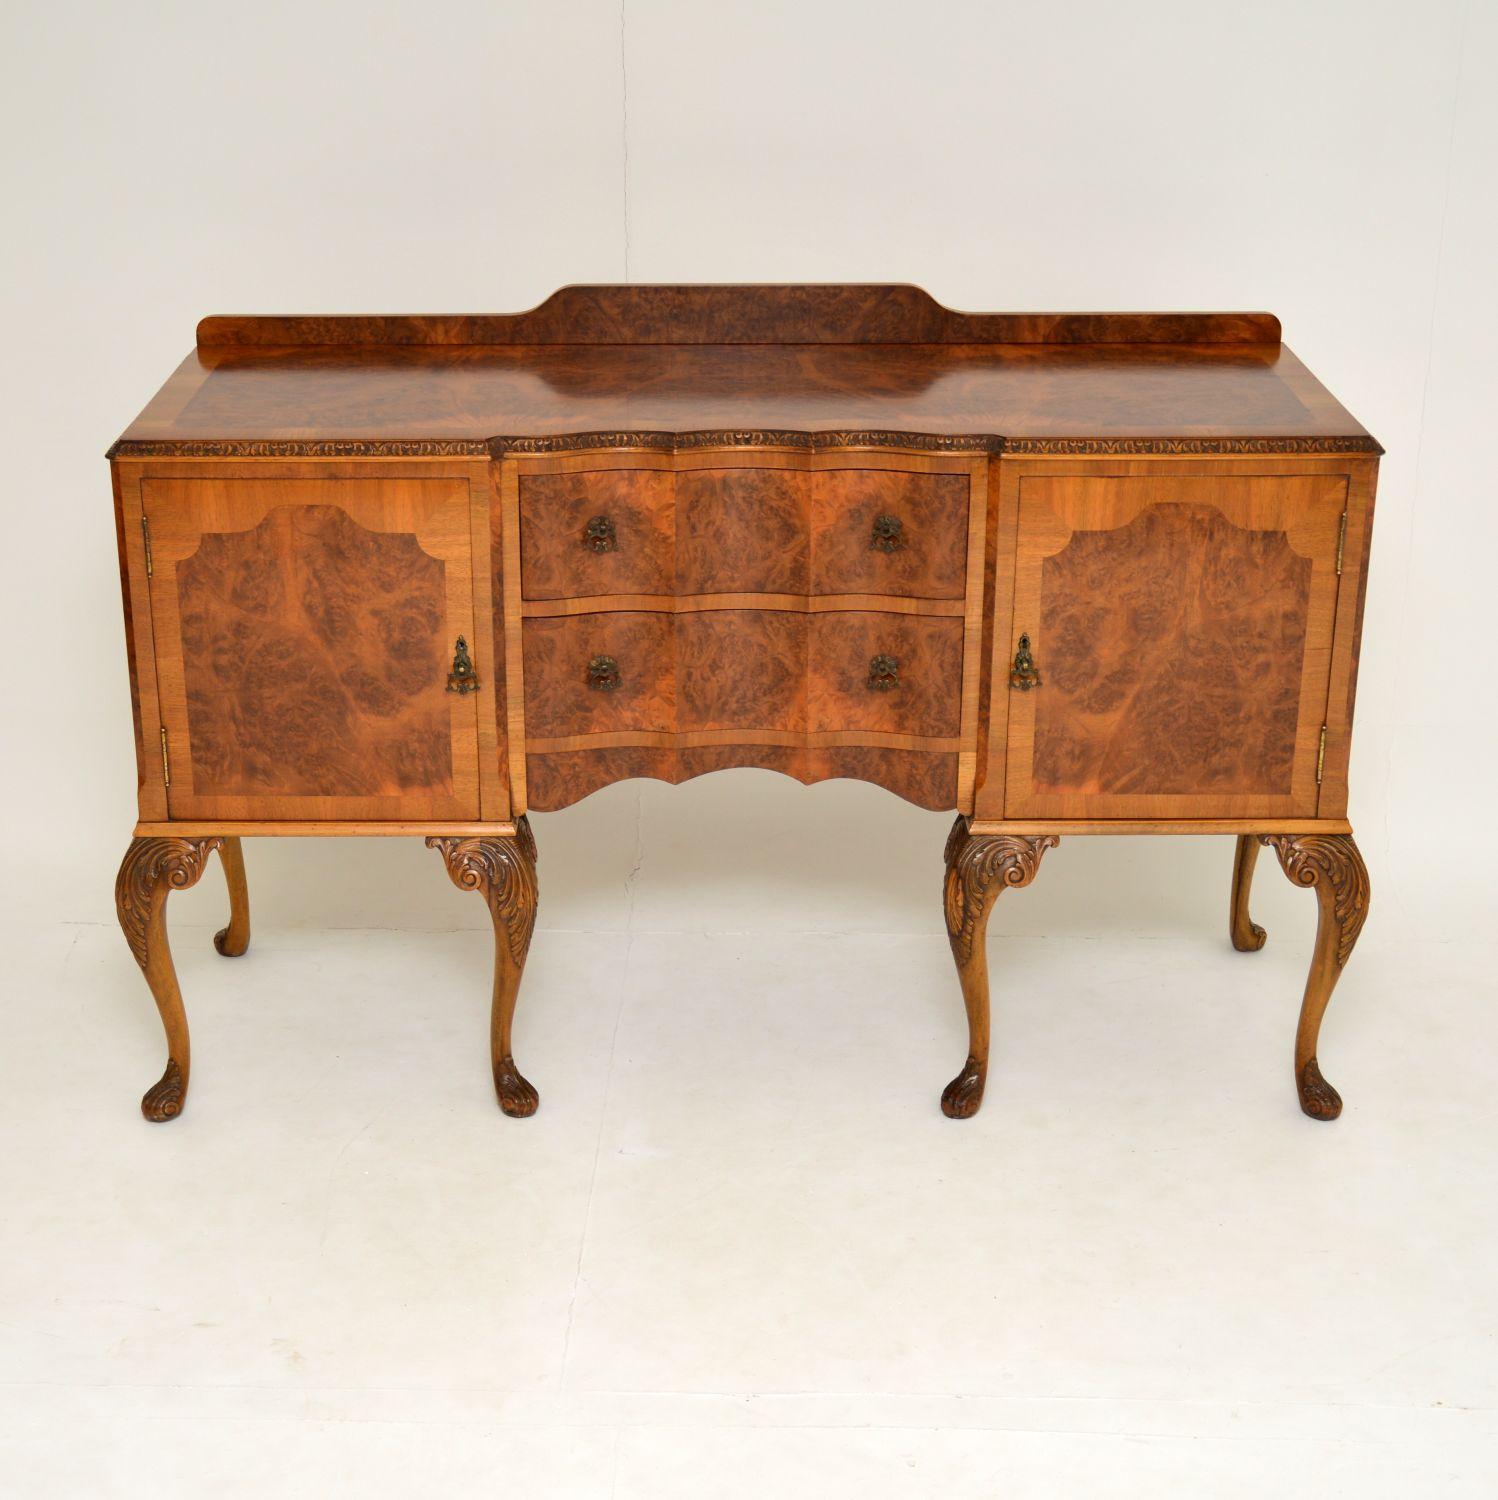 A stunning antique sideboard in the Queen Anne style, beautifully made from burr walnut. This dates from the 1920s-1930s and is of superb quality. We are fairly sure this was made by H & L Epstein, who were high end furniture makers in